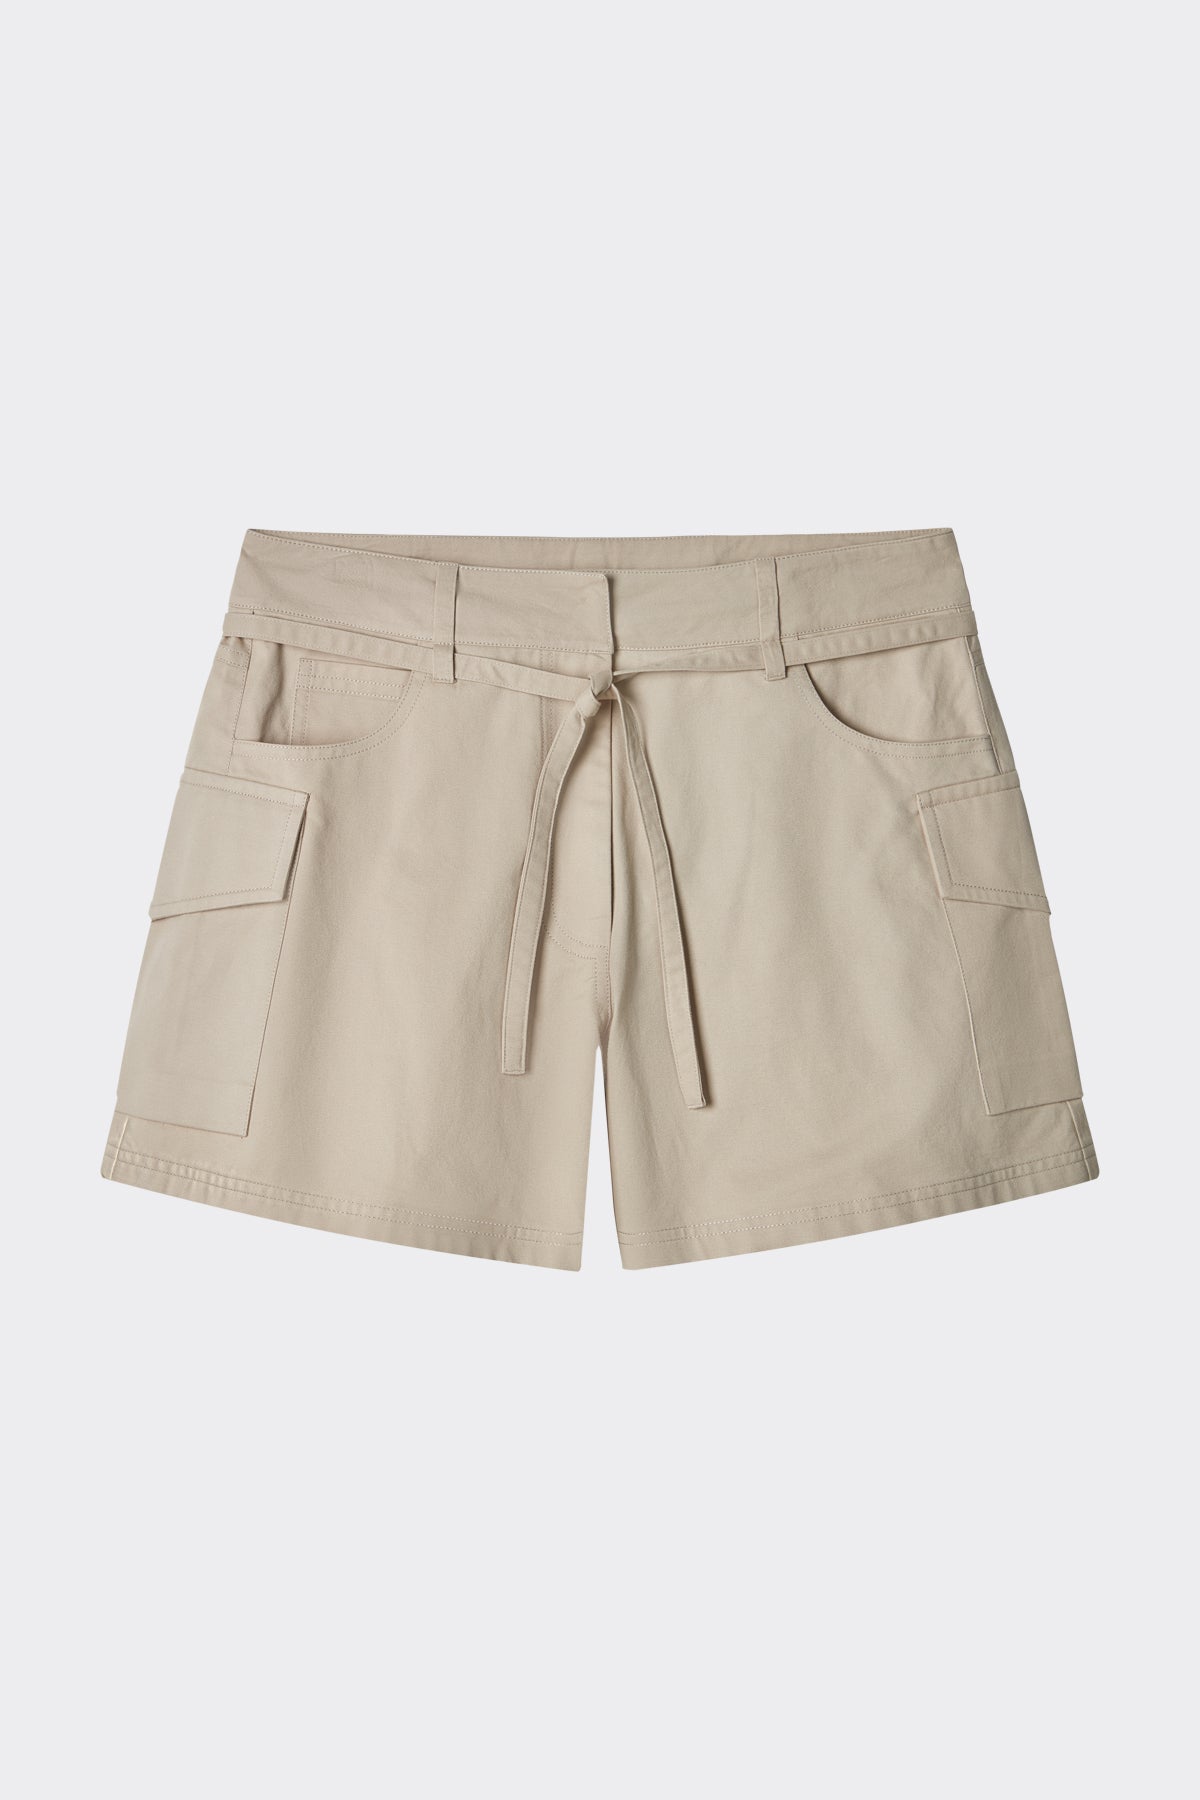 Makena Shorts in Sand | Noon By Noor